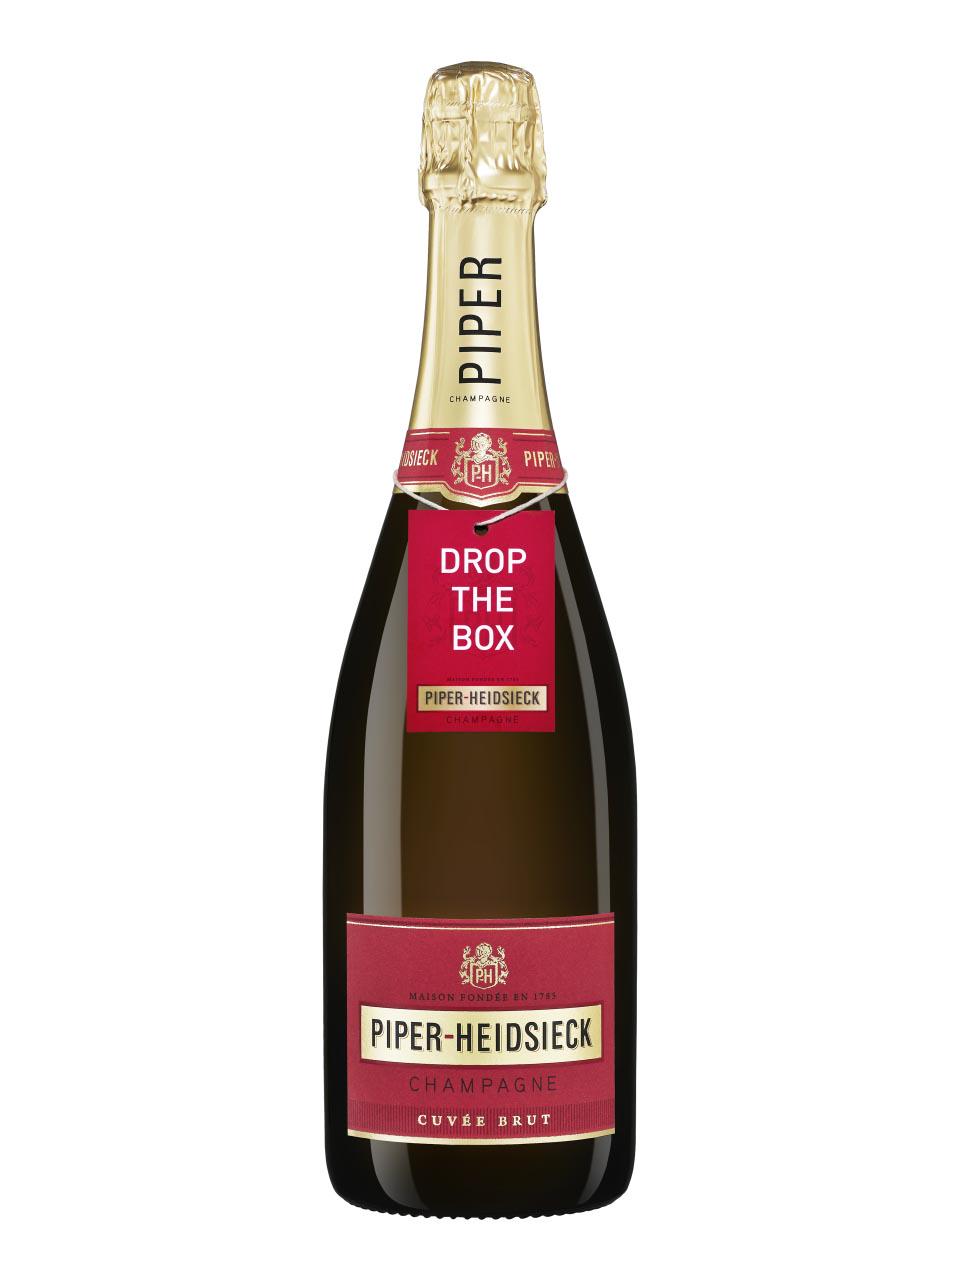 Piper-Heidsieck, Cuvée Limited 0.75L Frankfurt | Shopping brut, weiß Champagne, Airport AOC, New Year gift box) Online Brut, (Chinese Edition